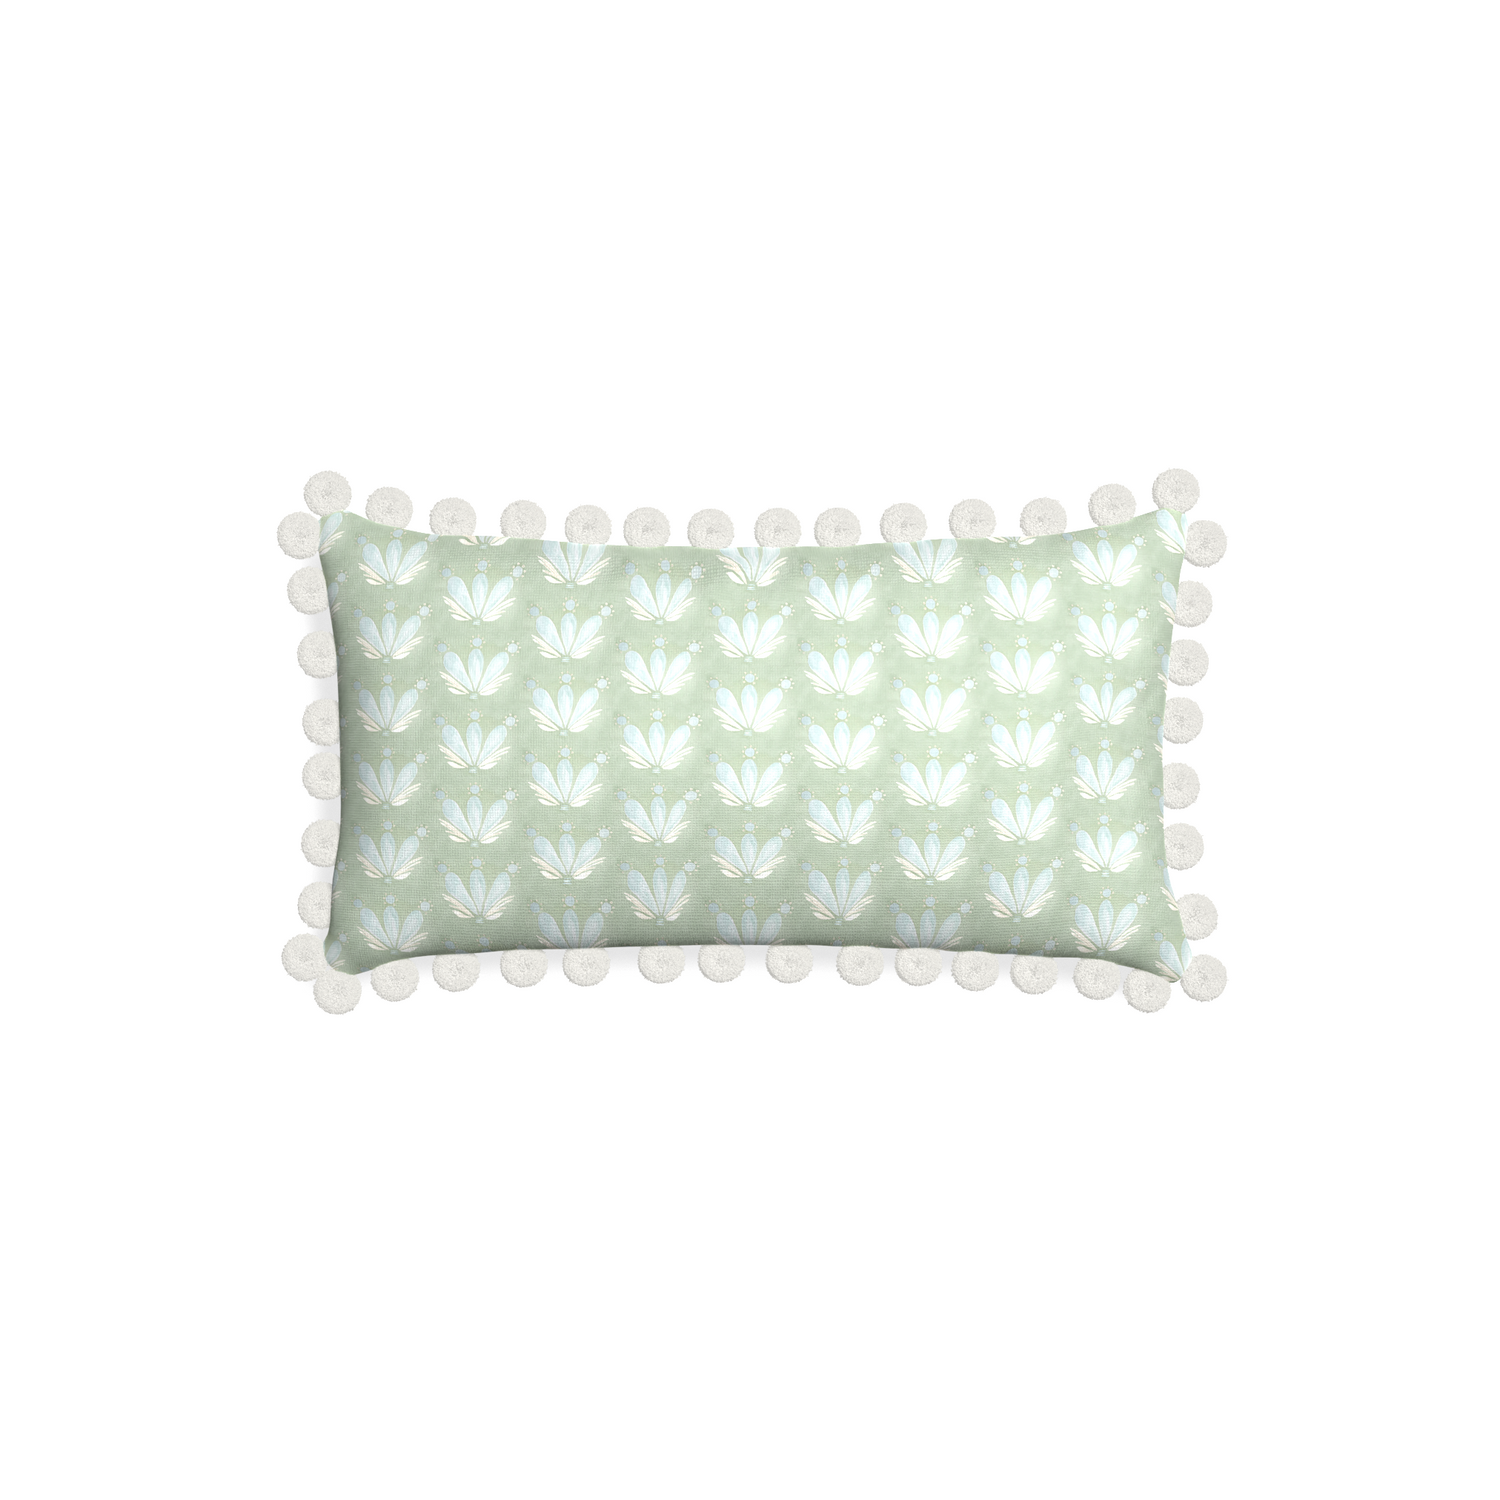 Petite-lumbar serena sea salt custom blue & green floral drop repeatpillow with snow pom pom on white background